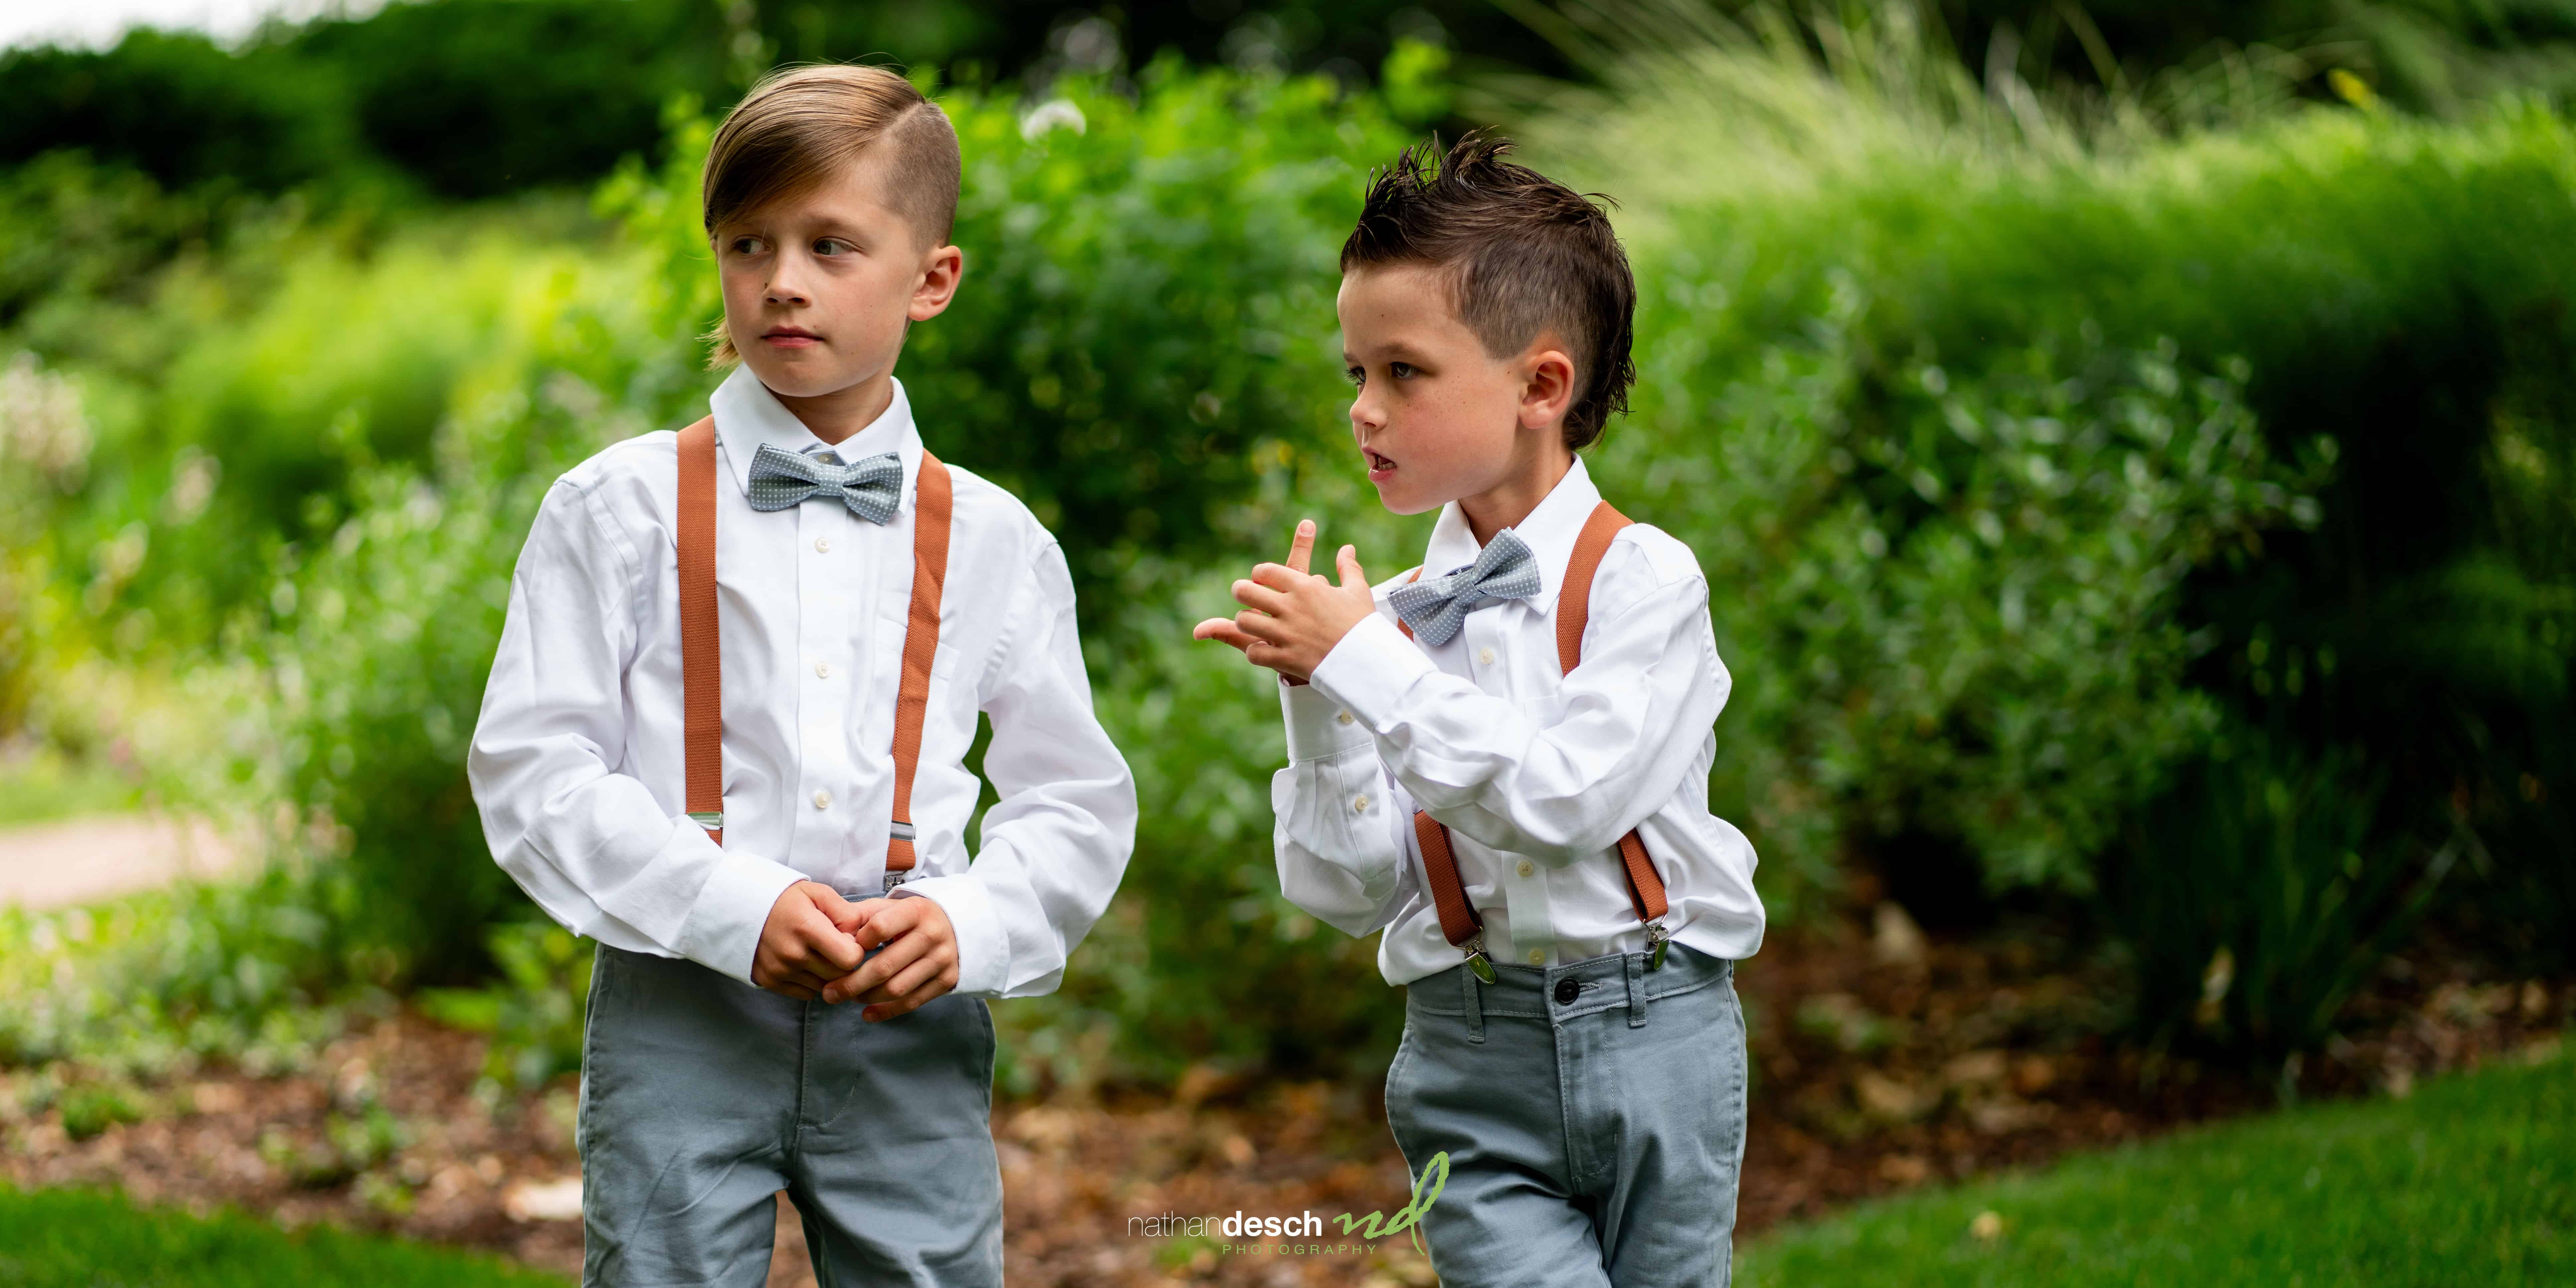 little boy giving the middle finger at wedding